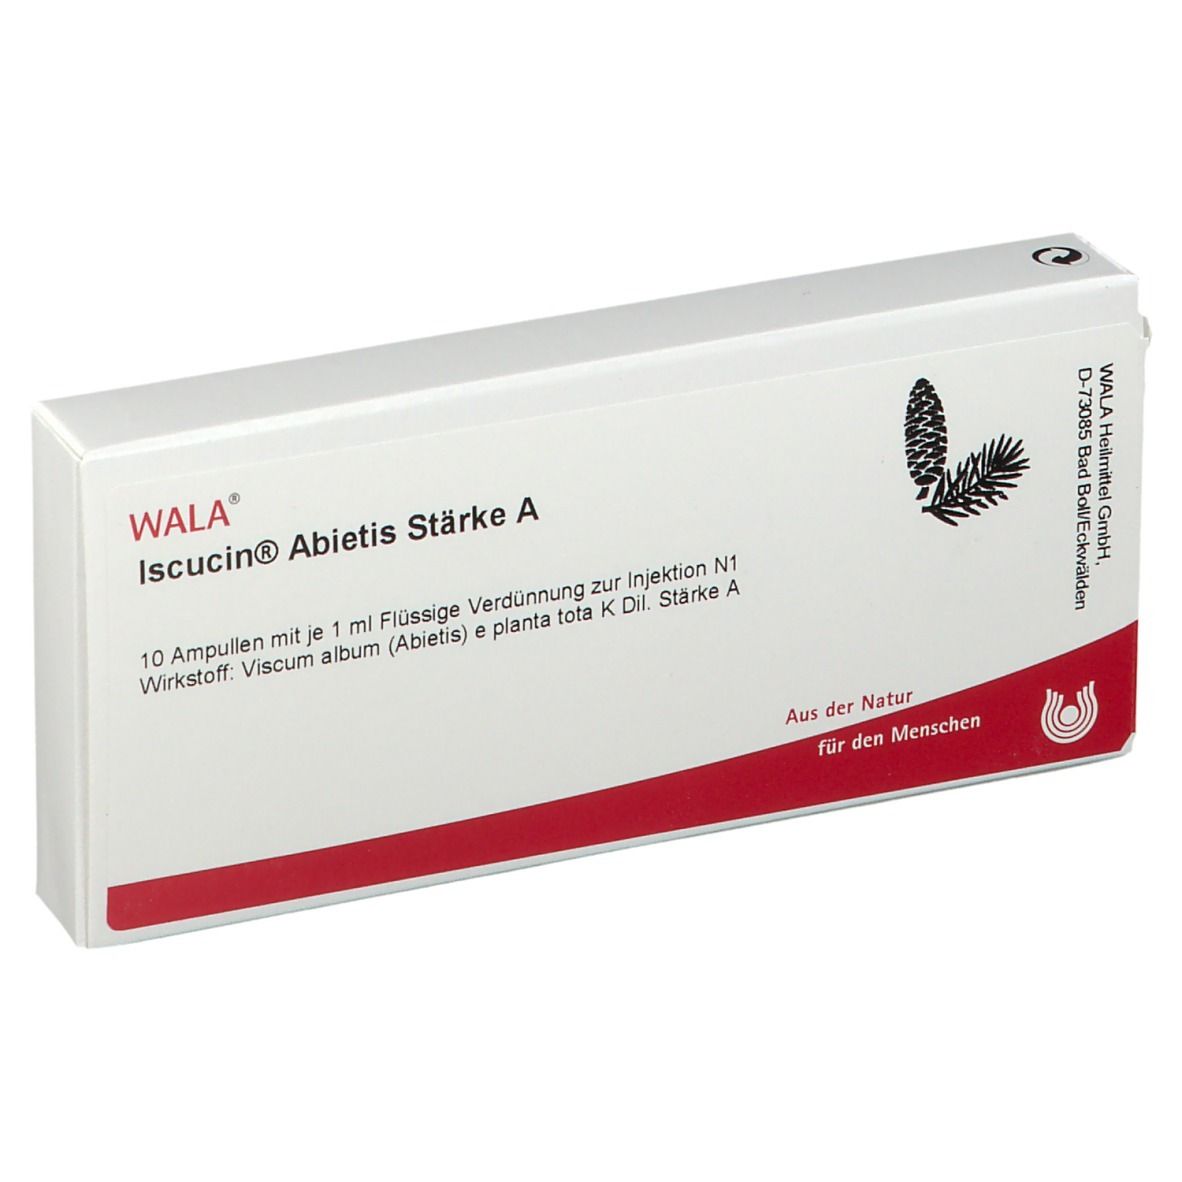 Wala® Iscucin Abietis St.a Amp.